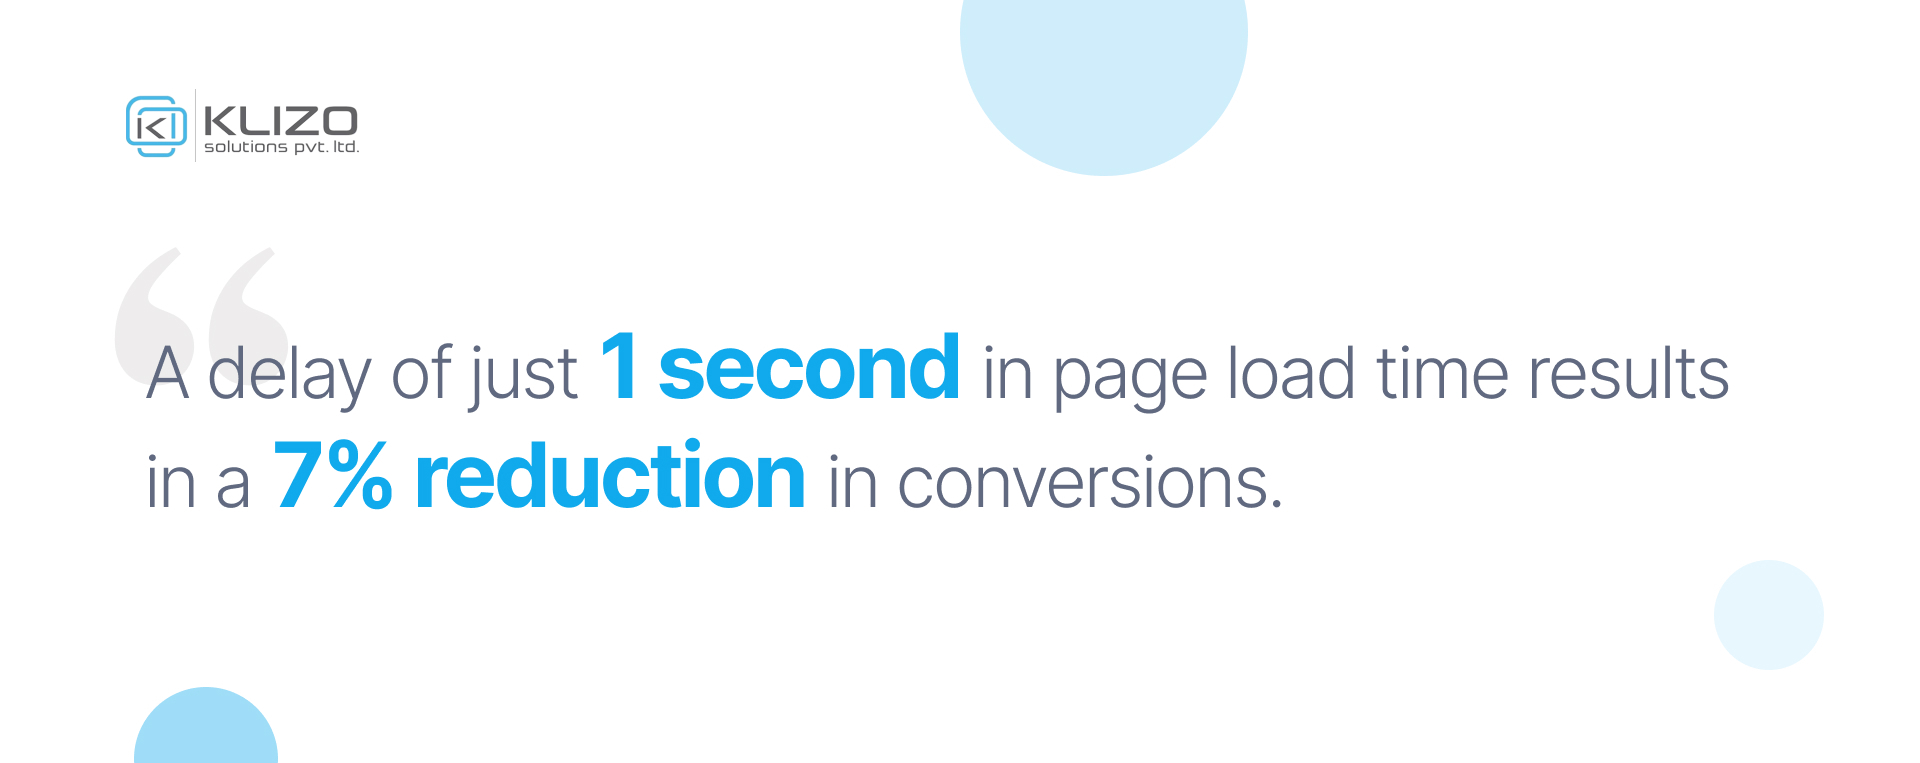 A delay of just 1 second in page load time results in a 7% reduction in conversions.